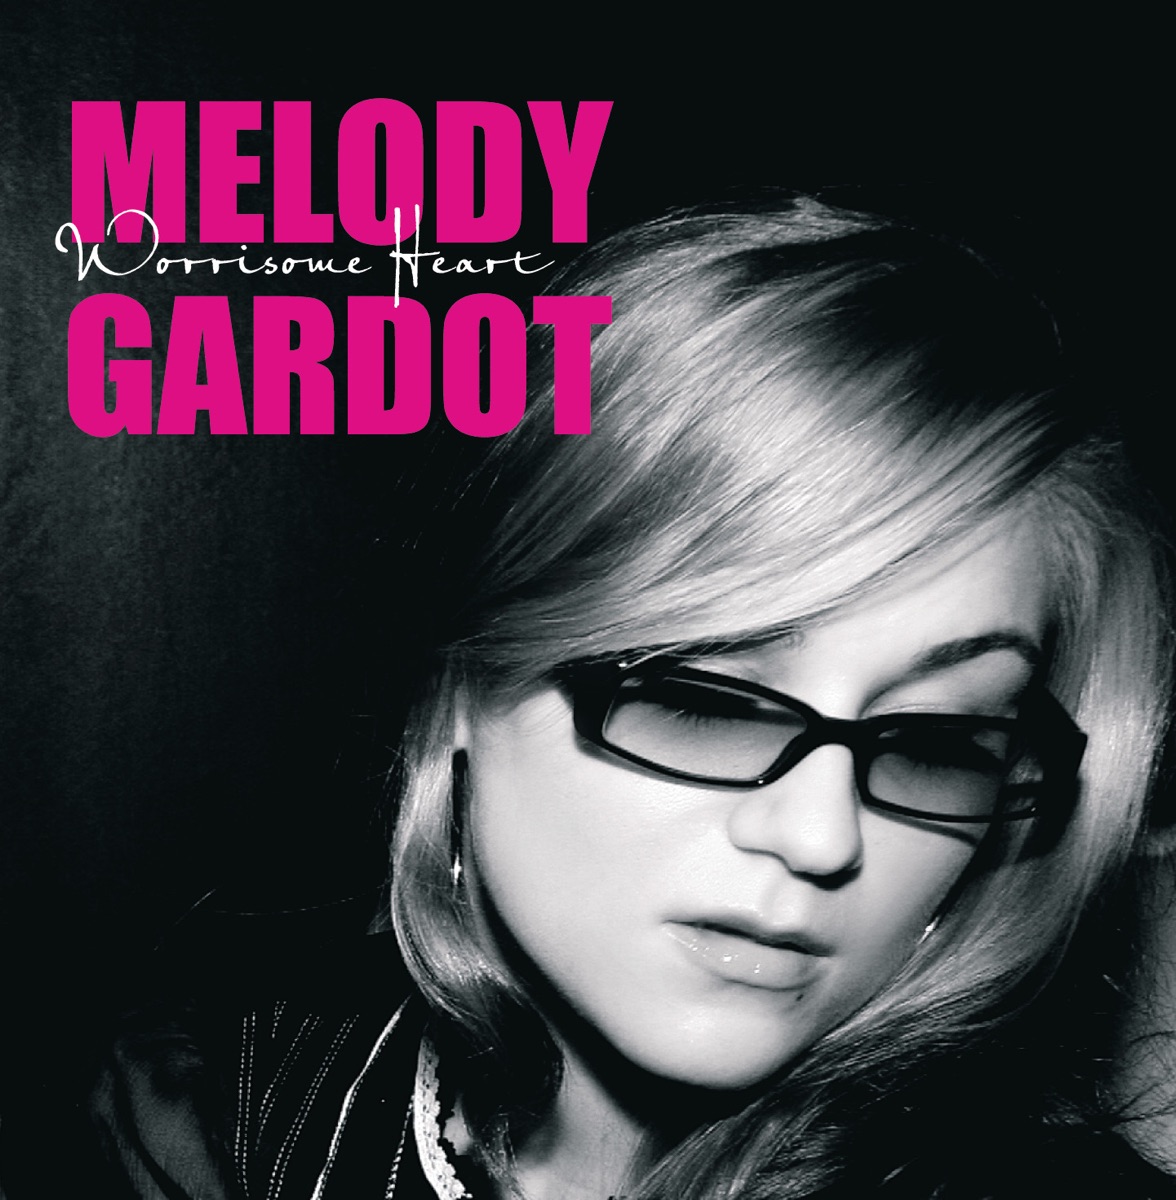 My One and Only Thrill (Deluxe Version) by Melody Gardot on Apple Music